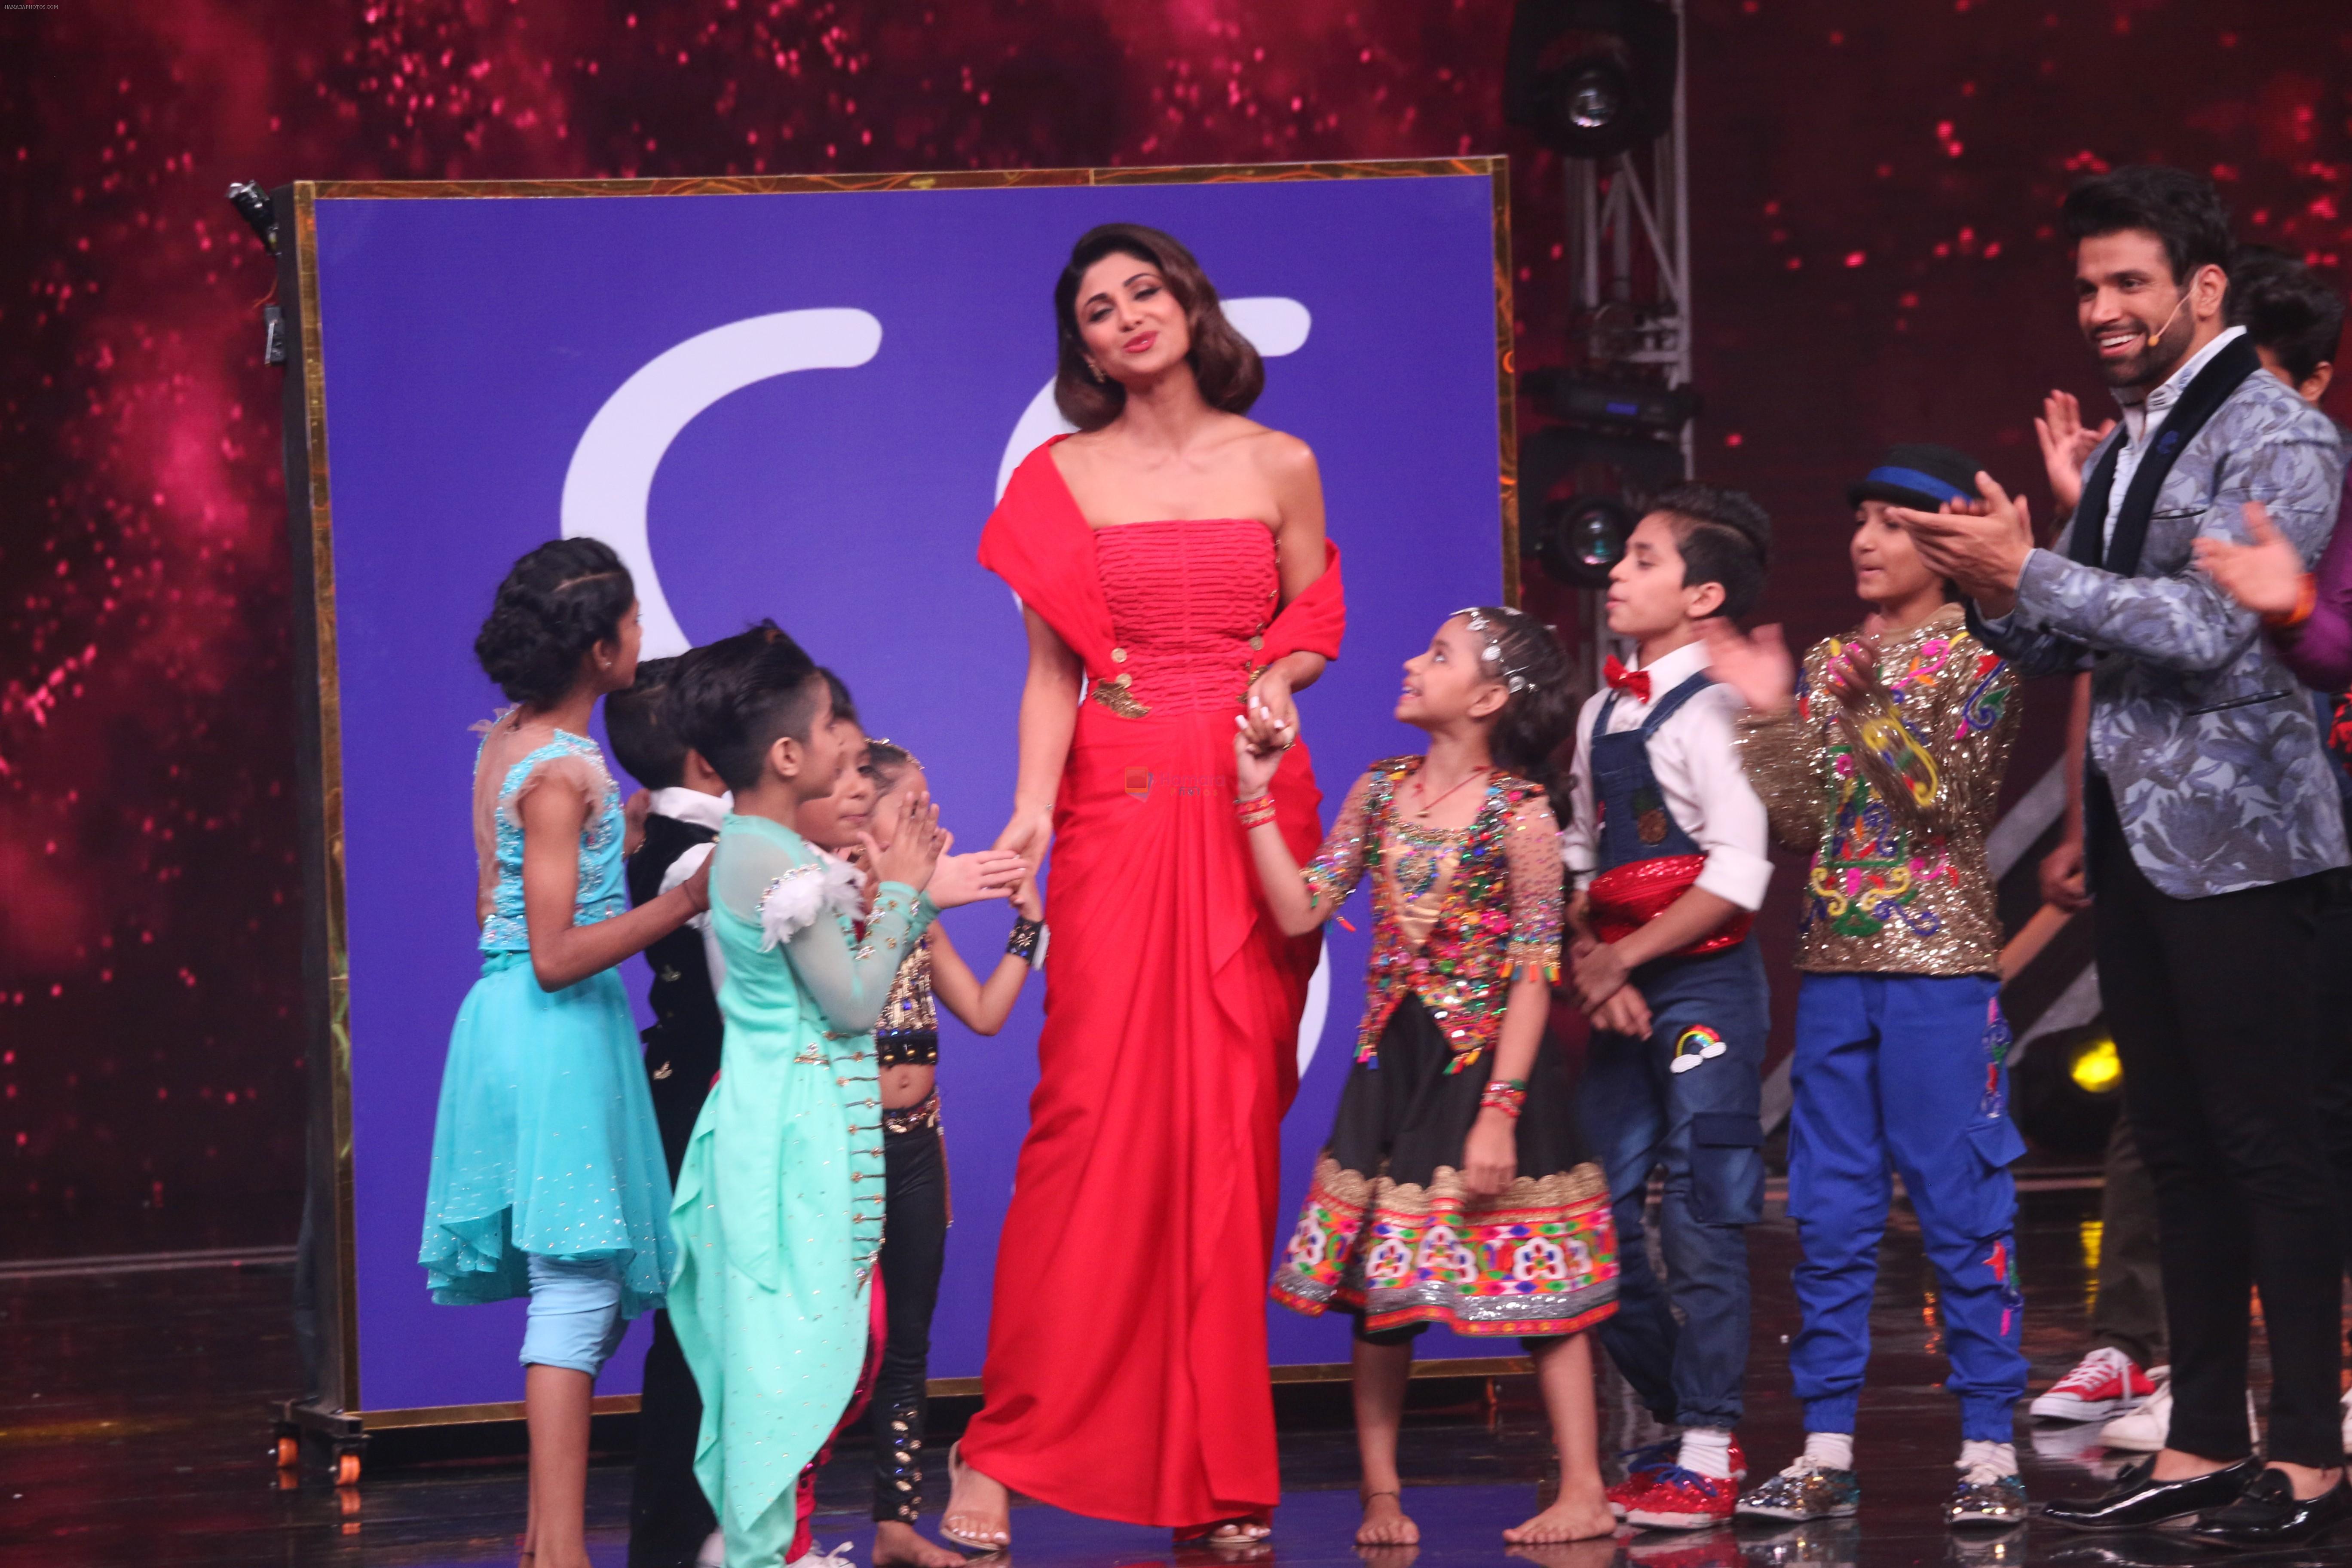 Shilpa Shetty on the sets of Super Dancer Chapter 3 in filmcity on 3rd June 2019